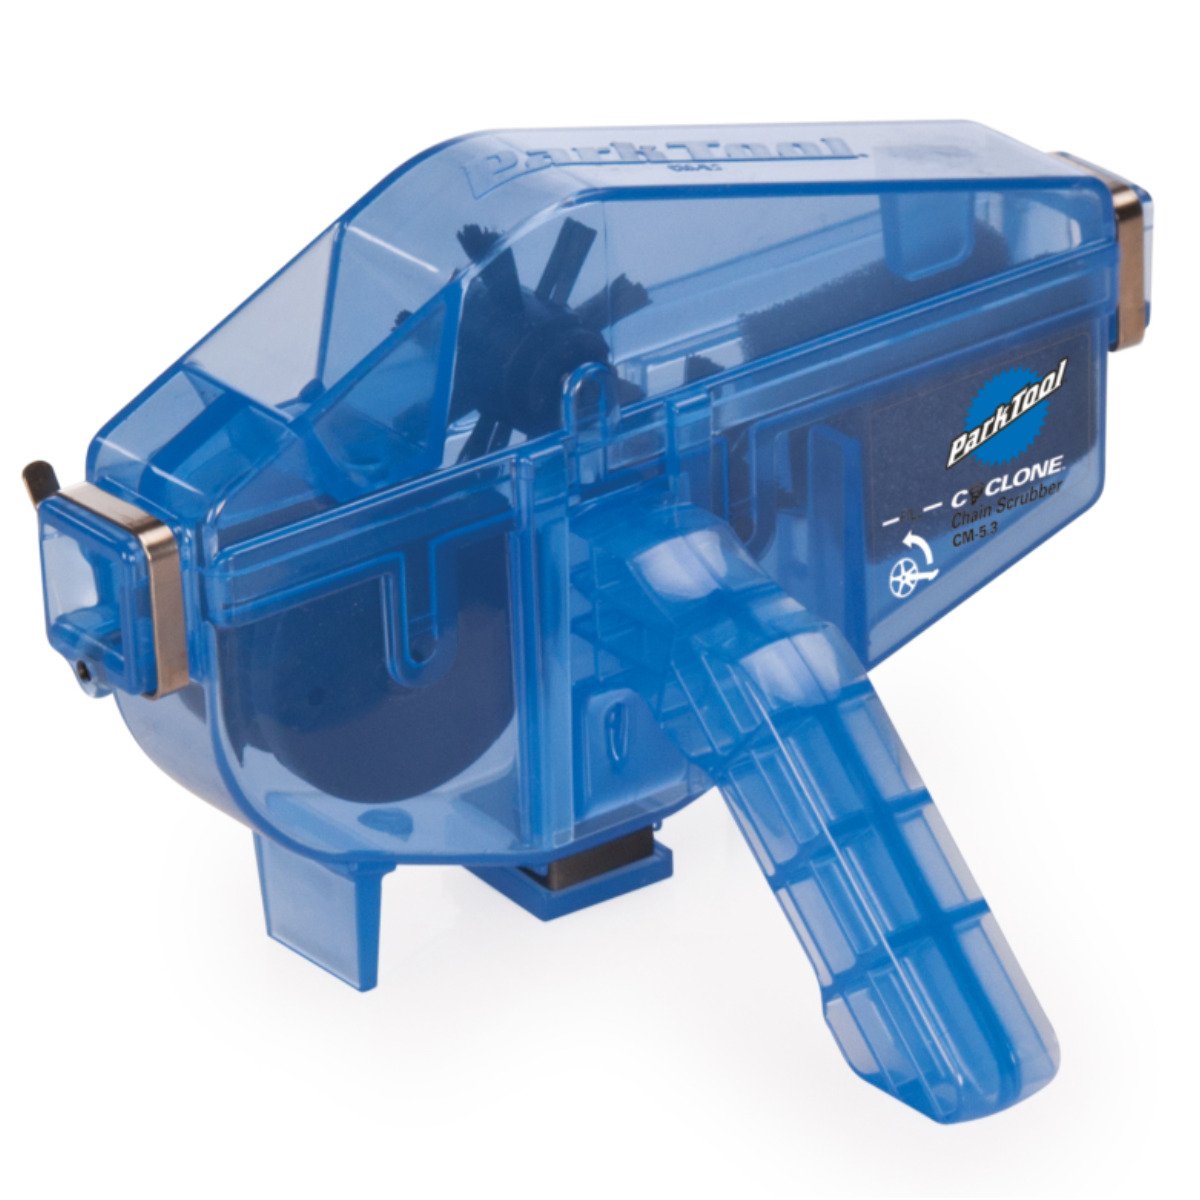 Park Tool Chain Cleaner CM-5.3